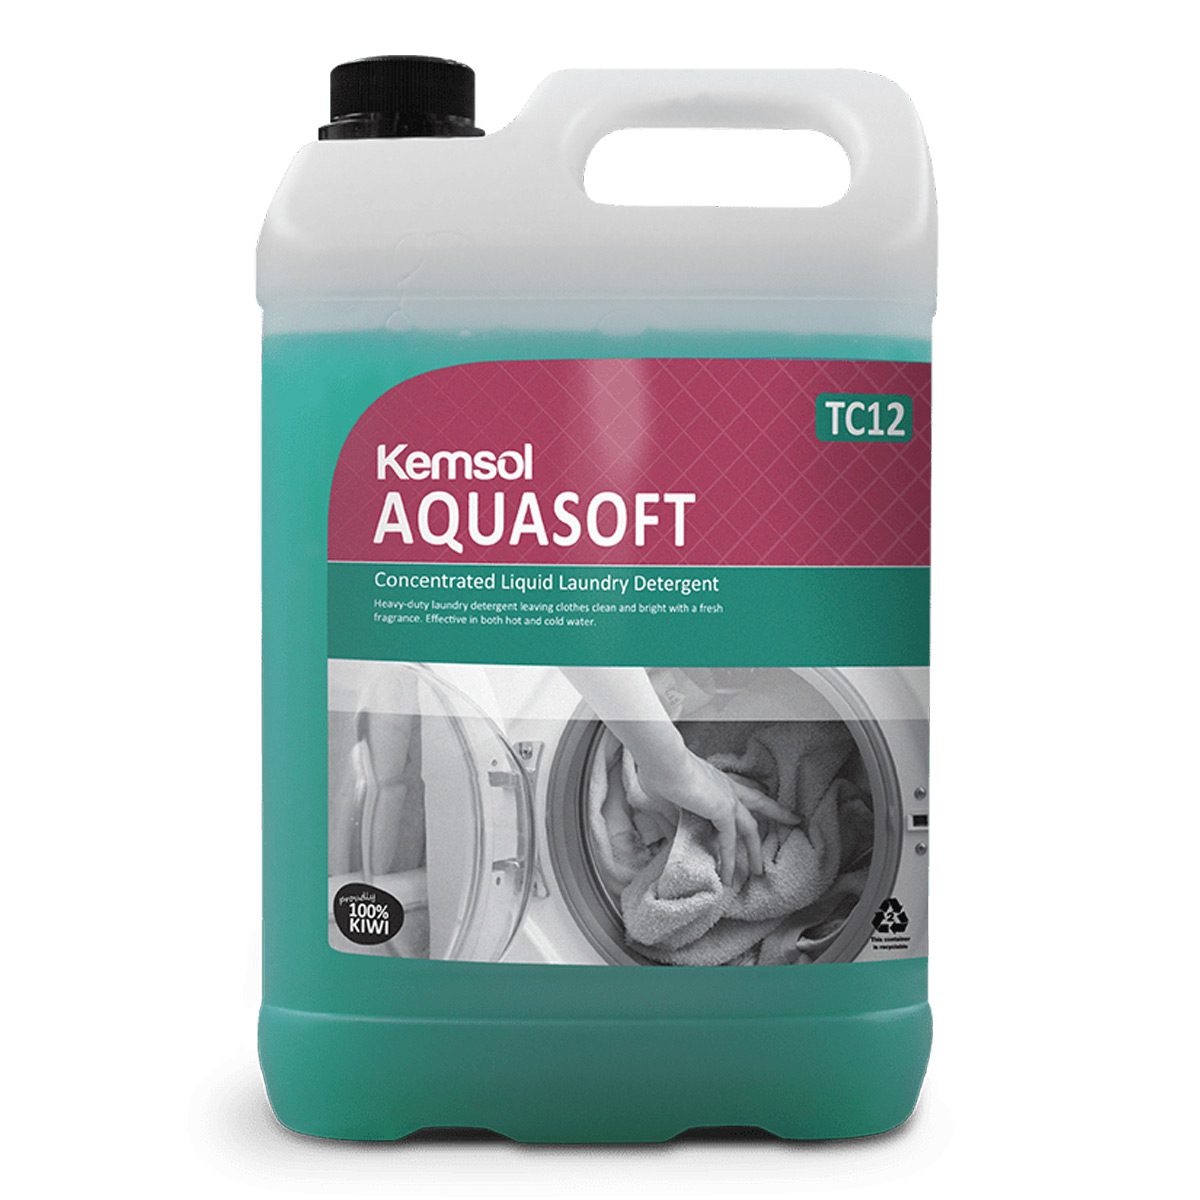 cleaning-products-laundry-kemsol-aquasoft-liquid-laundry-detergent-heavy-duty-laundry-detergent-clothes-clean-bright-fresh fragrance-effective-hot-cold-water-vjs-distributors-KAQUASKU